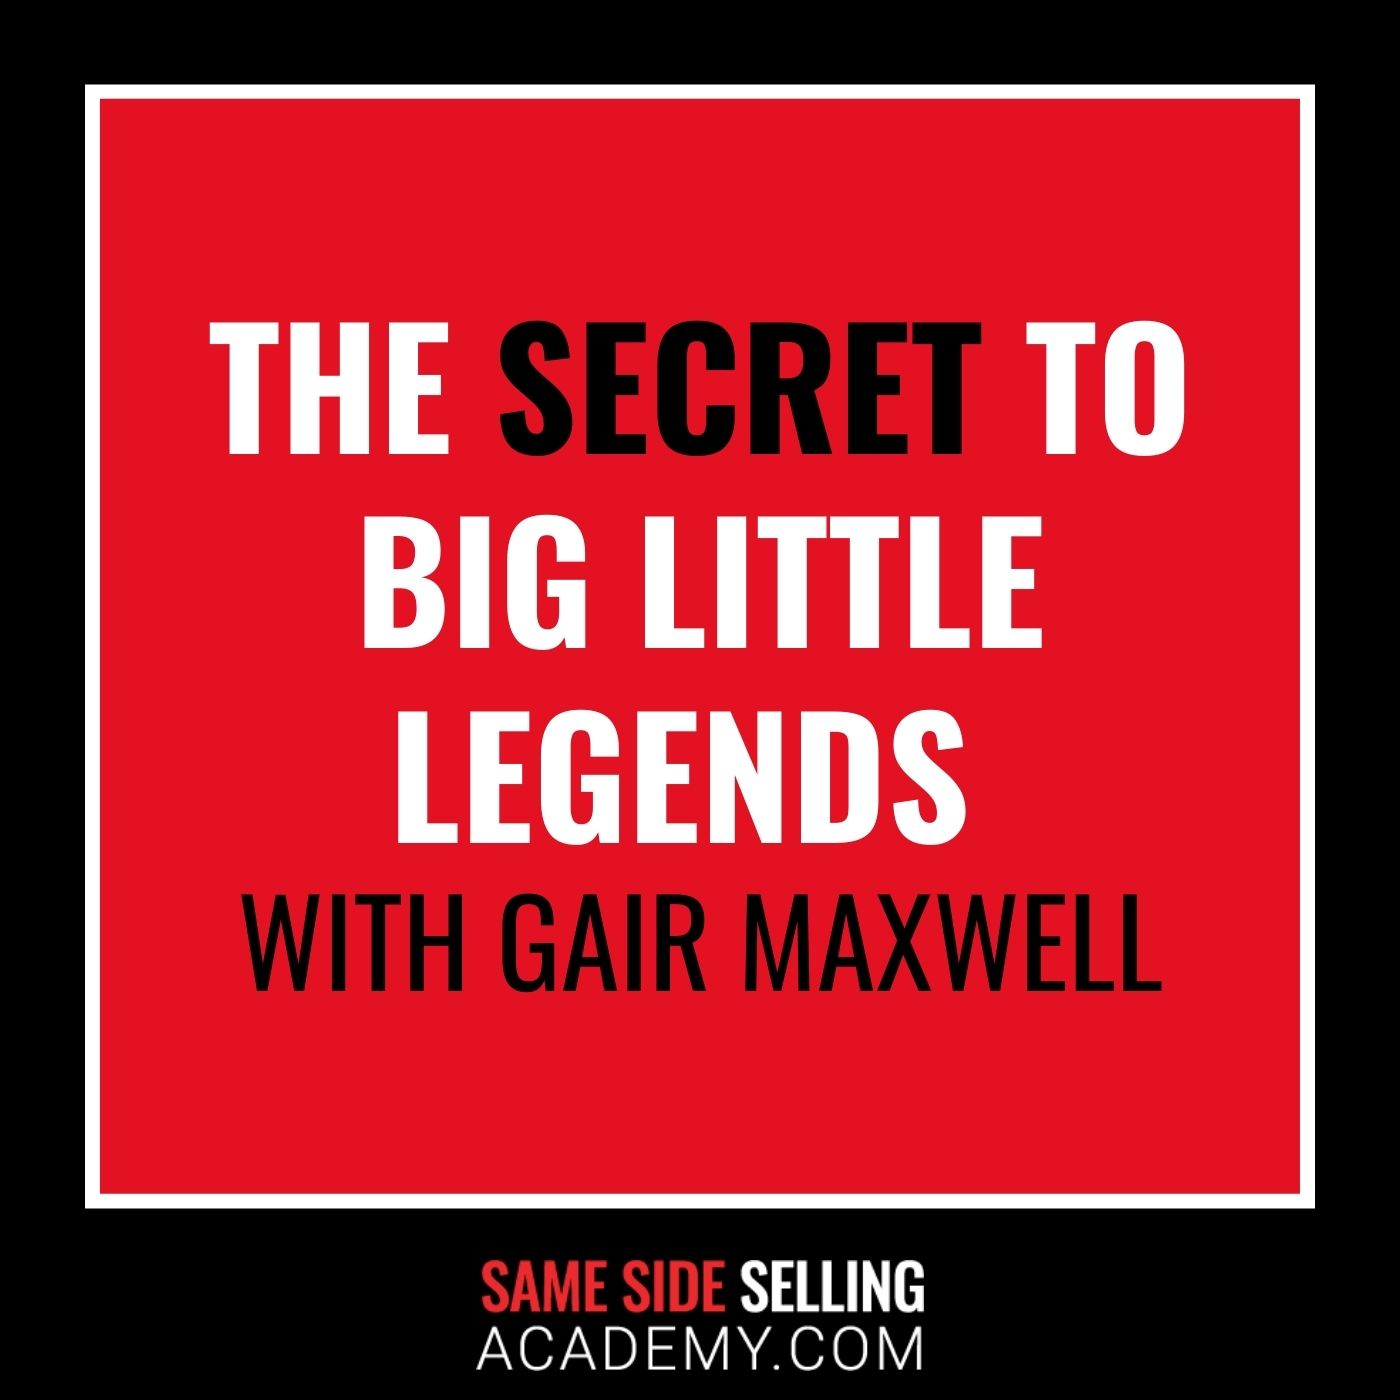 The Secret to Big Little Legends with Gair Maxwell